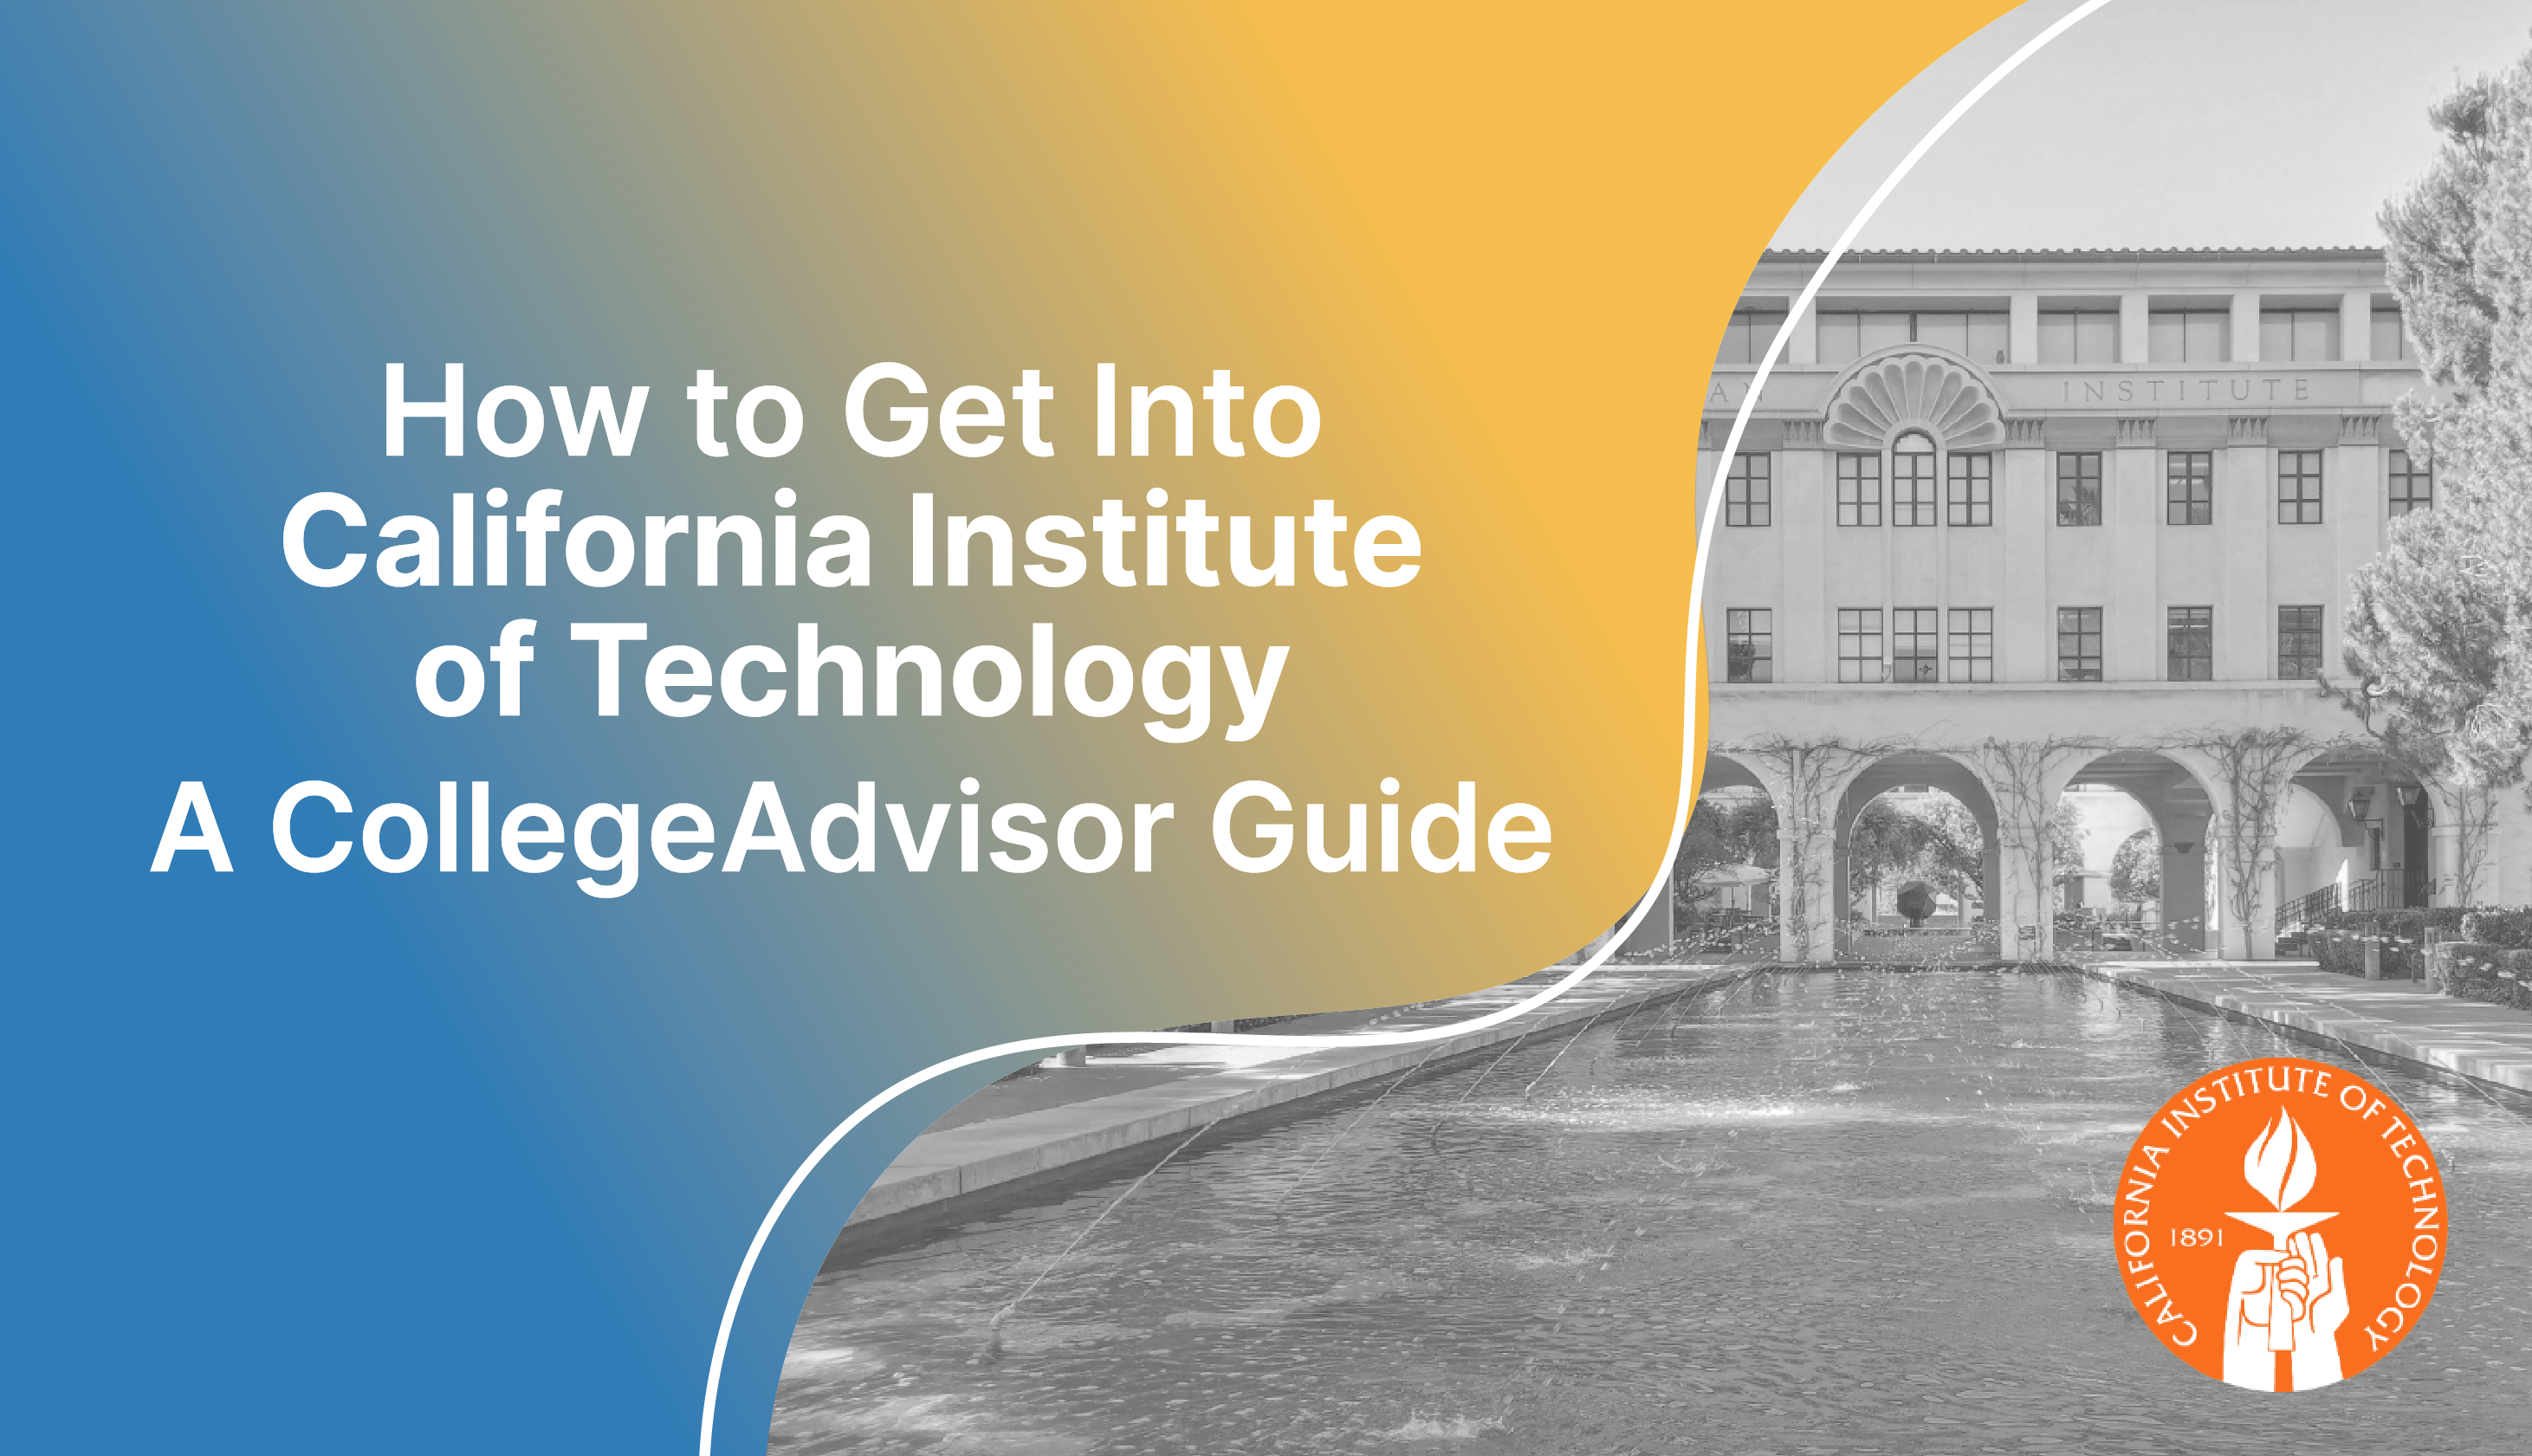 How to Get Into Caltech California Institute of Technology